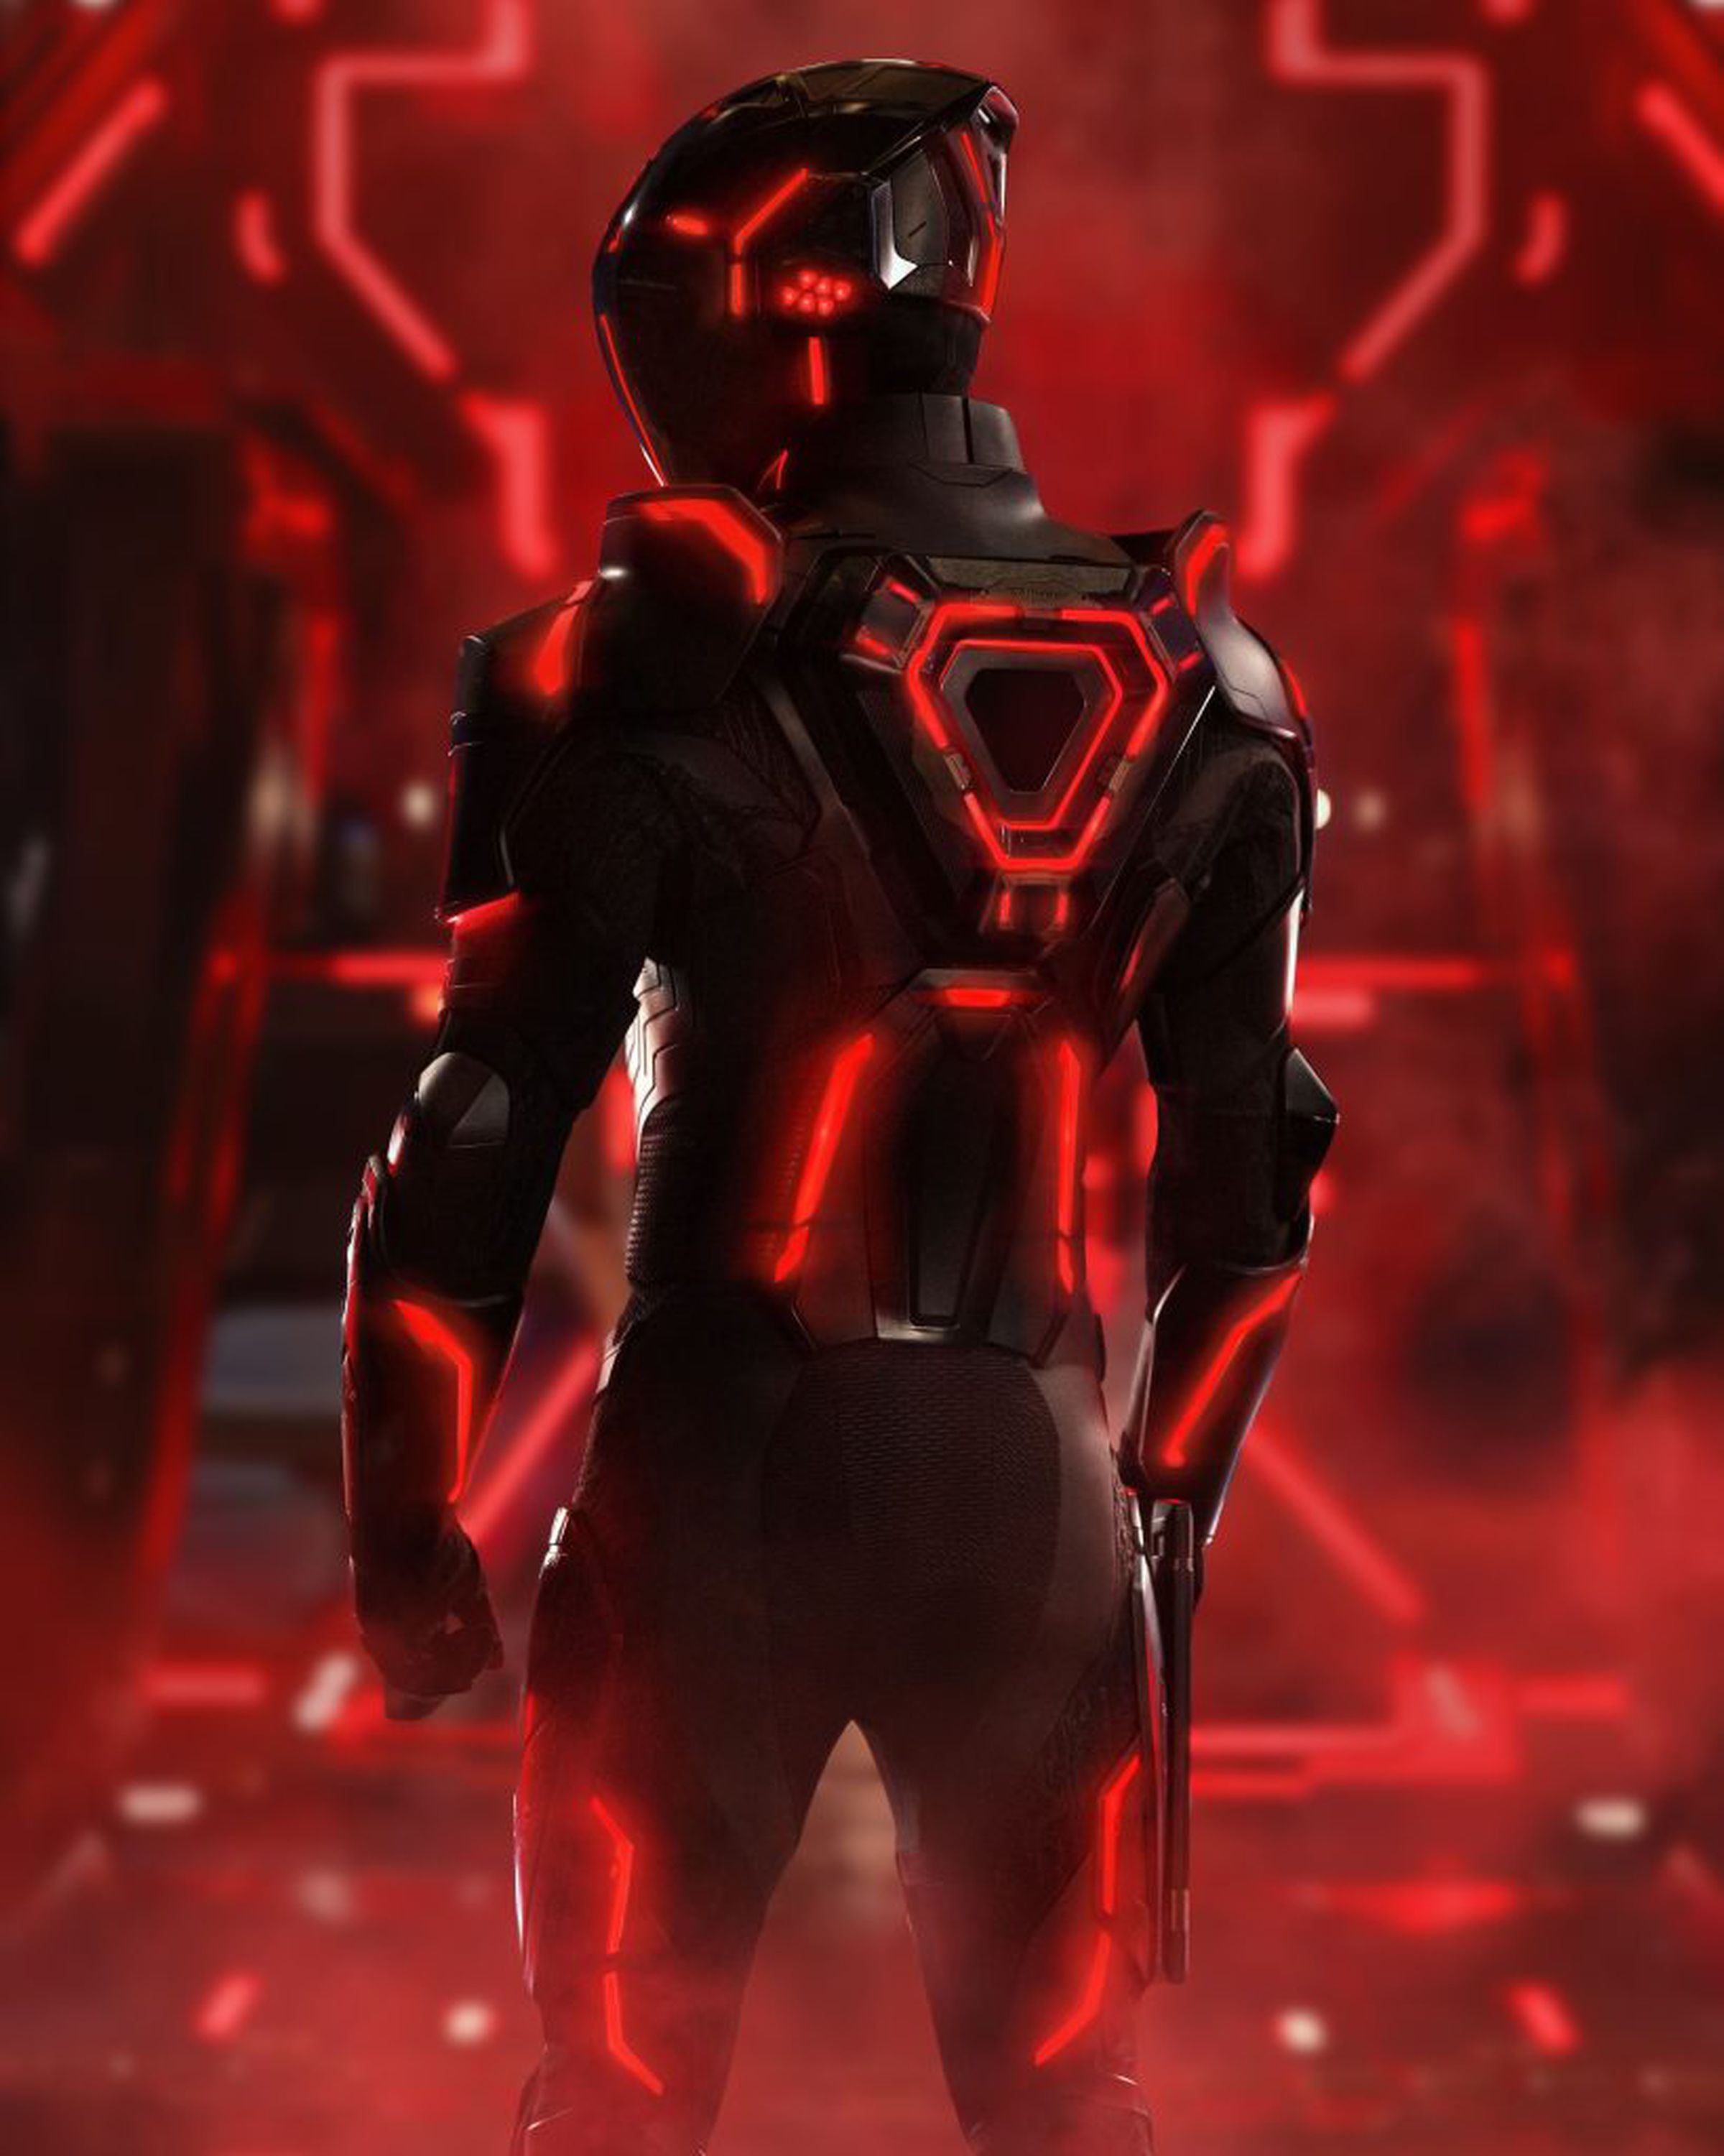 A first look image at a character in the film Tron: Ares.